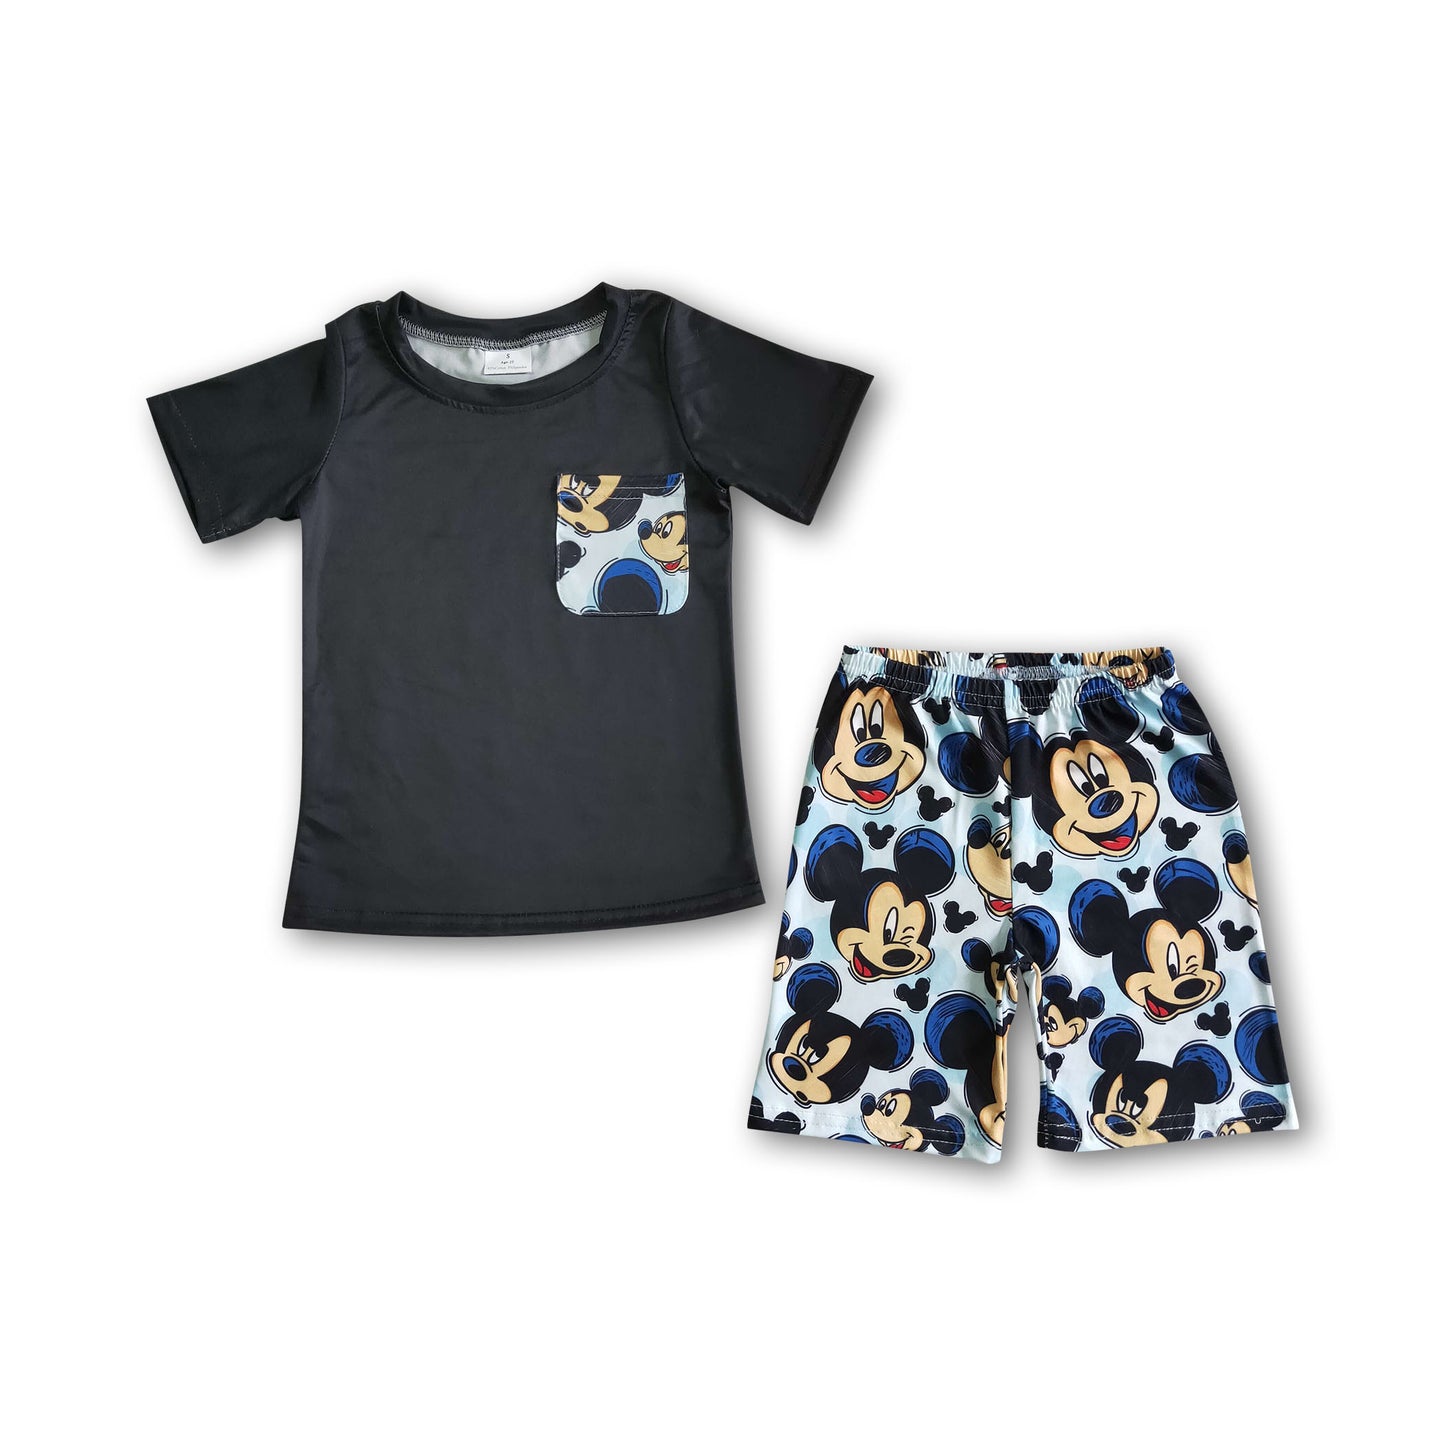 Black pocket cute mouse baby boy summer outfits